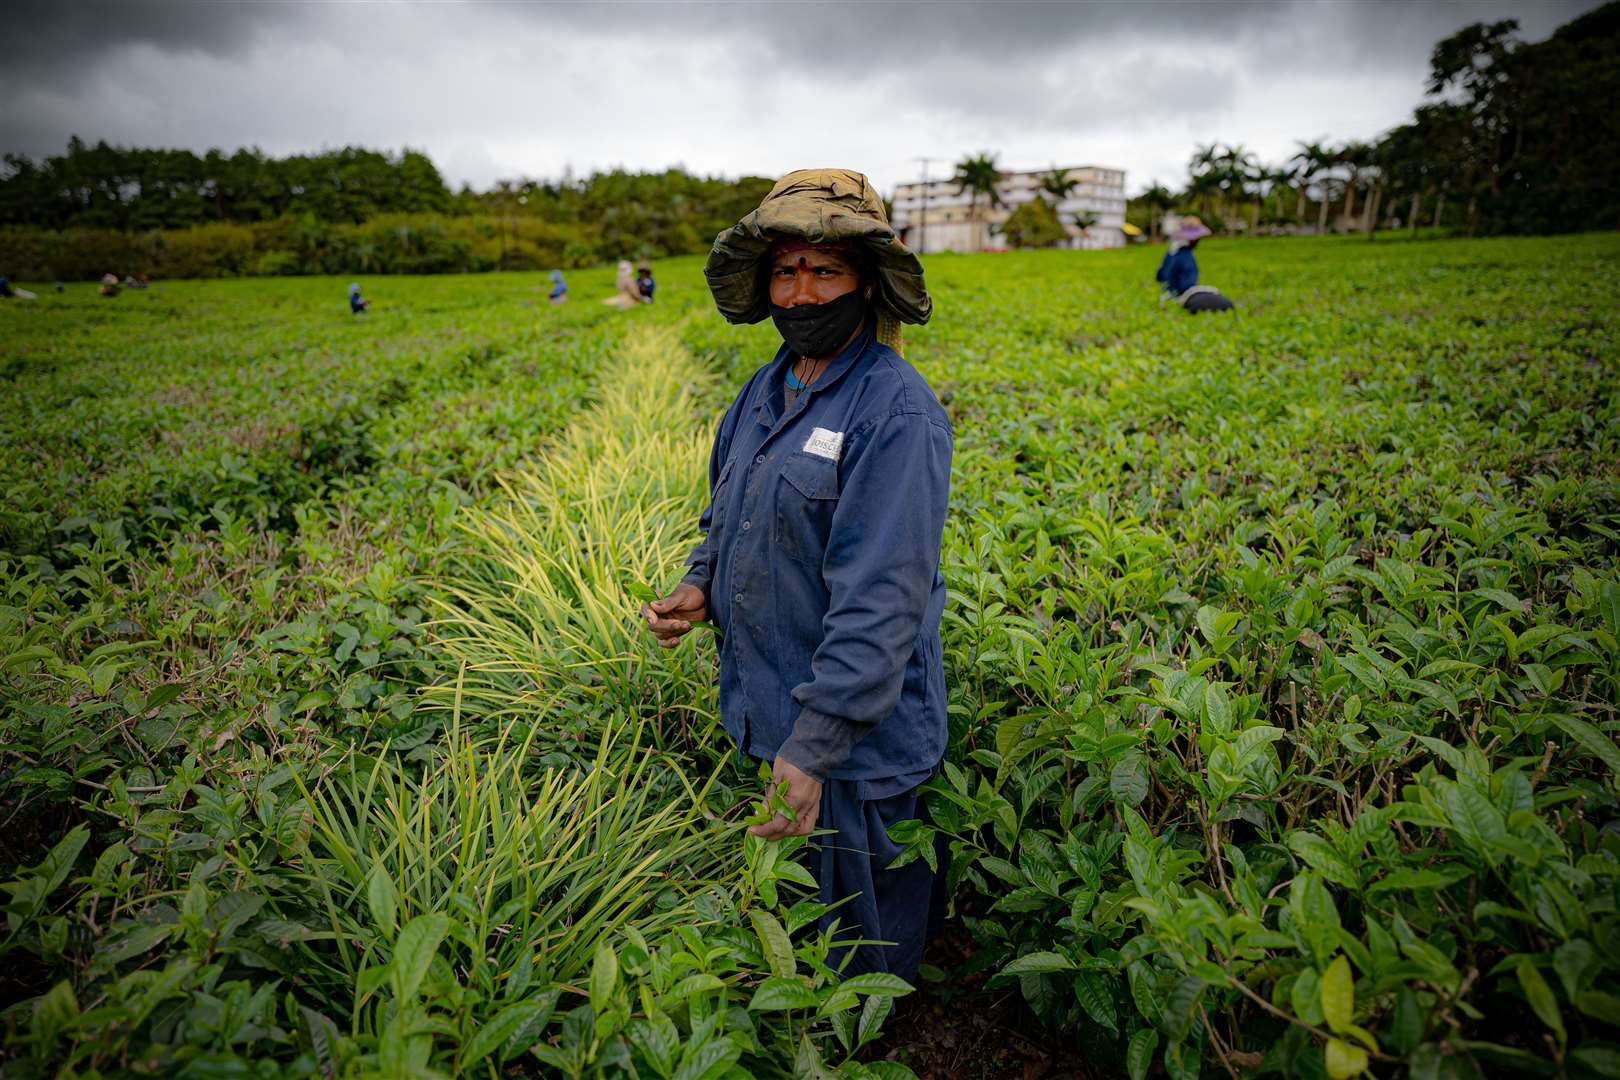 Tea farmer Oumila Ganas said the lack of tourists has affected her financially (Ben Birchall/PA)